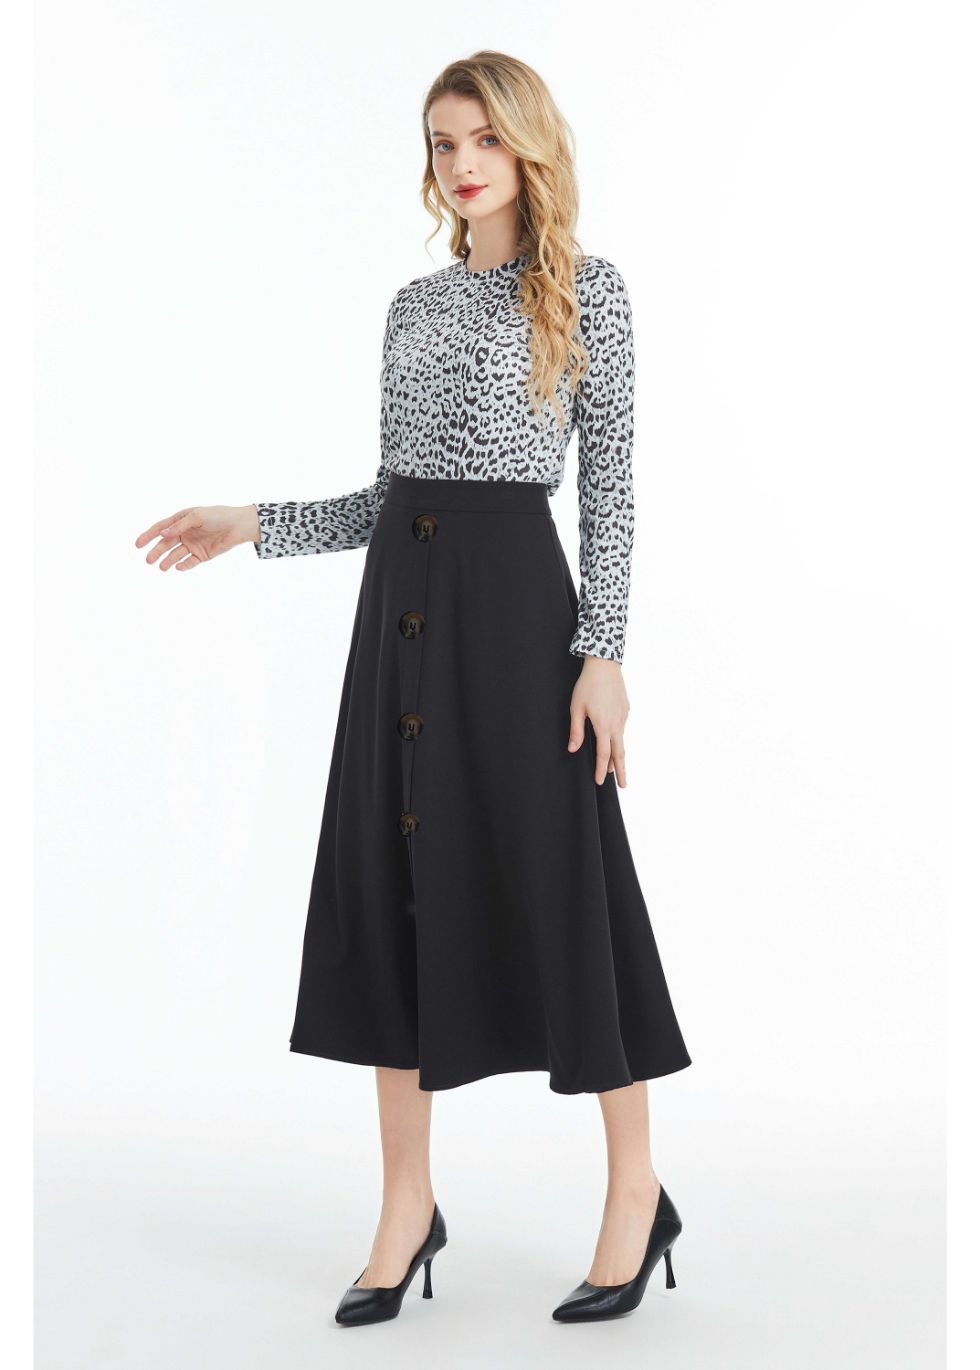 Fully Lined Black Midi Skirt with Front Button Detail - seilerlanguageservices